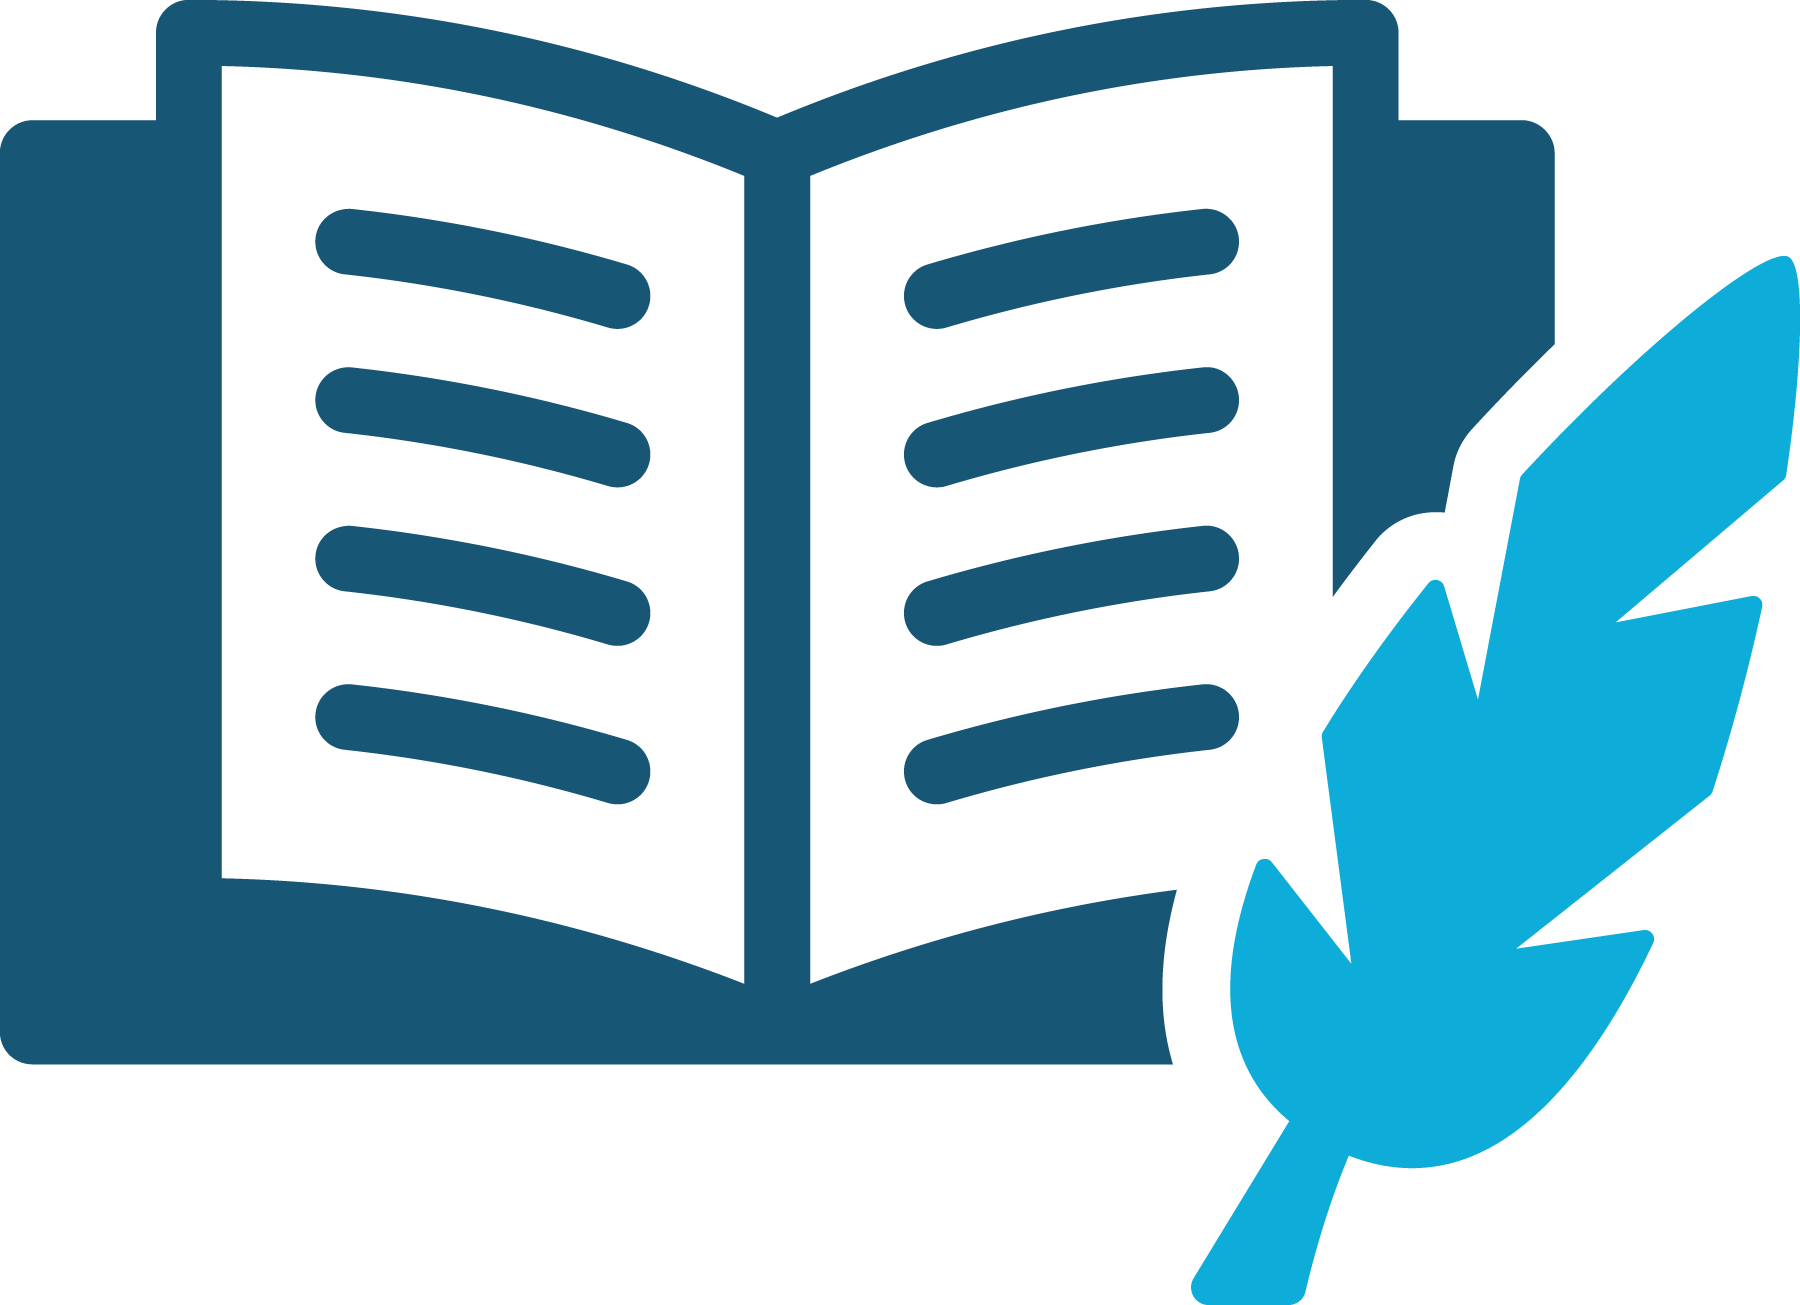 image of an icon for BASED ON A BOOK